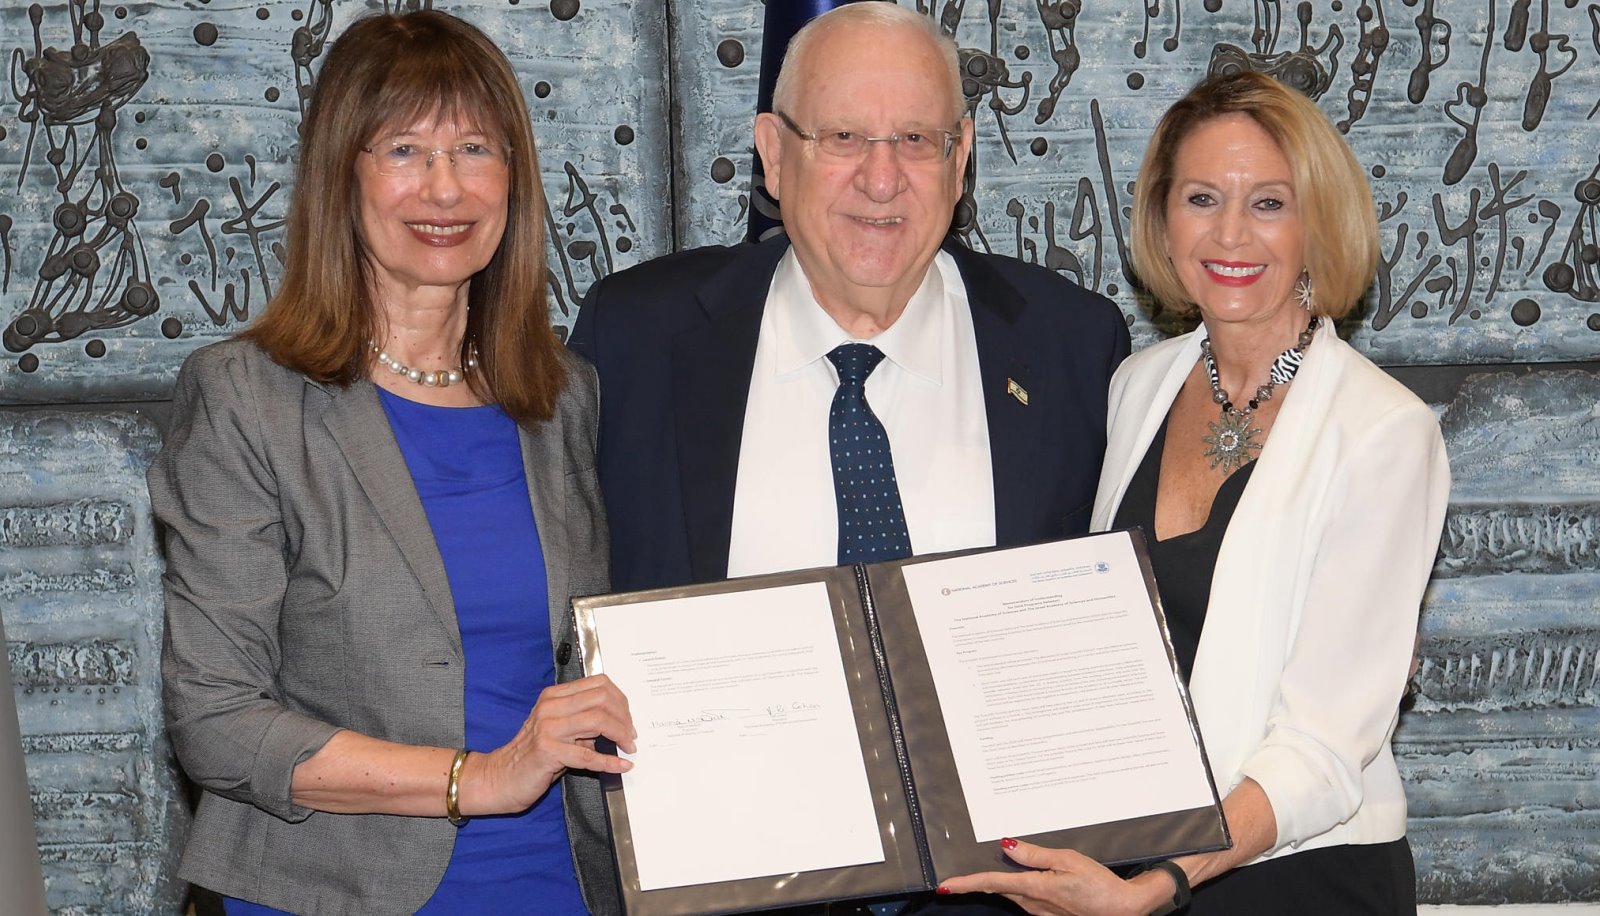 Prof. Nili Cohen, left, President Reuven Rivlin and Prof. Marcia McNutt sign the science academies cooperation agreement in Jerusalem on April 7, 2019. Photo by Amos Ben Gershom/GPO